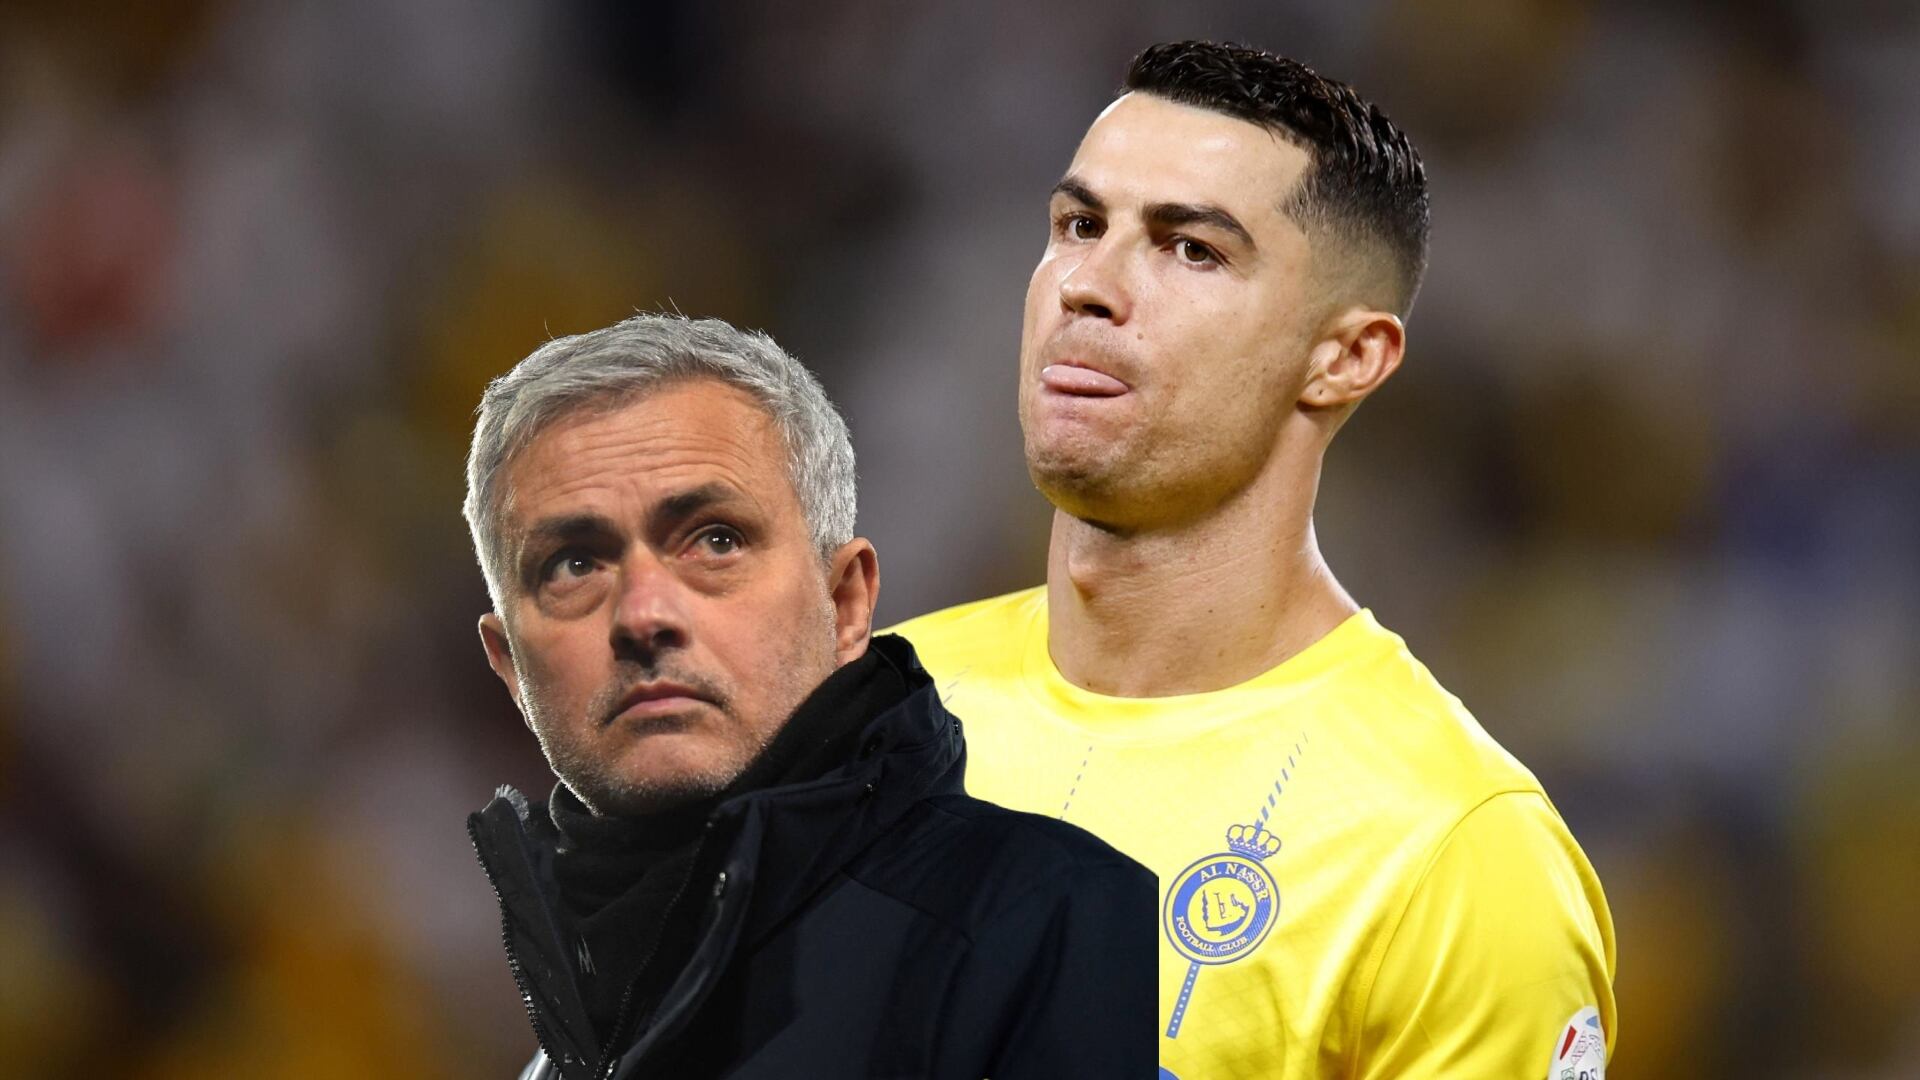 Not only Portugal, in Saudi they dream of bringing Cristiano & Mourinho together; the salary Mou would earn at Al Nassr